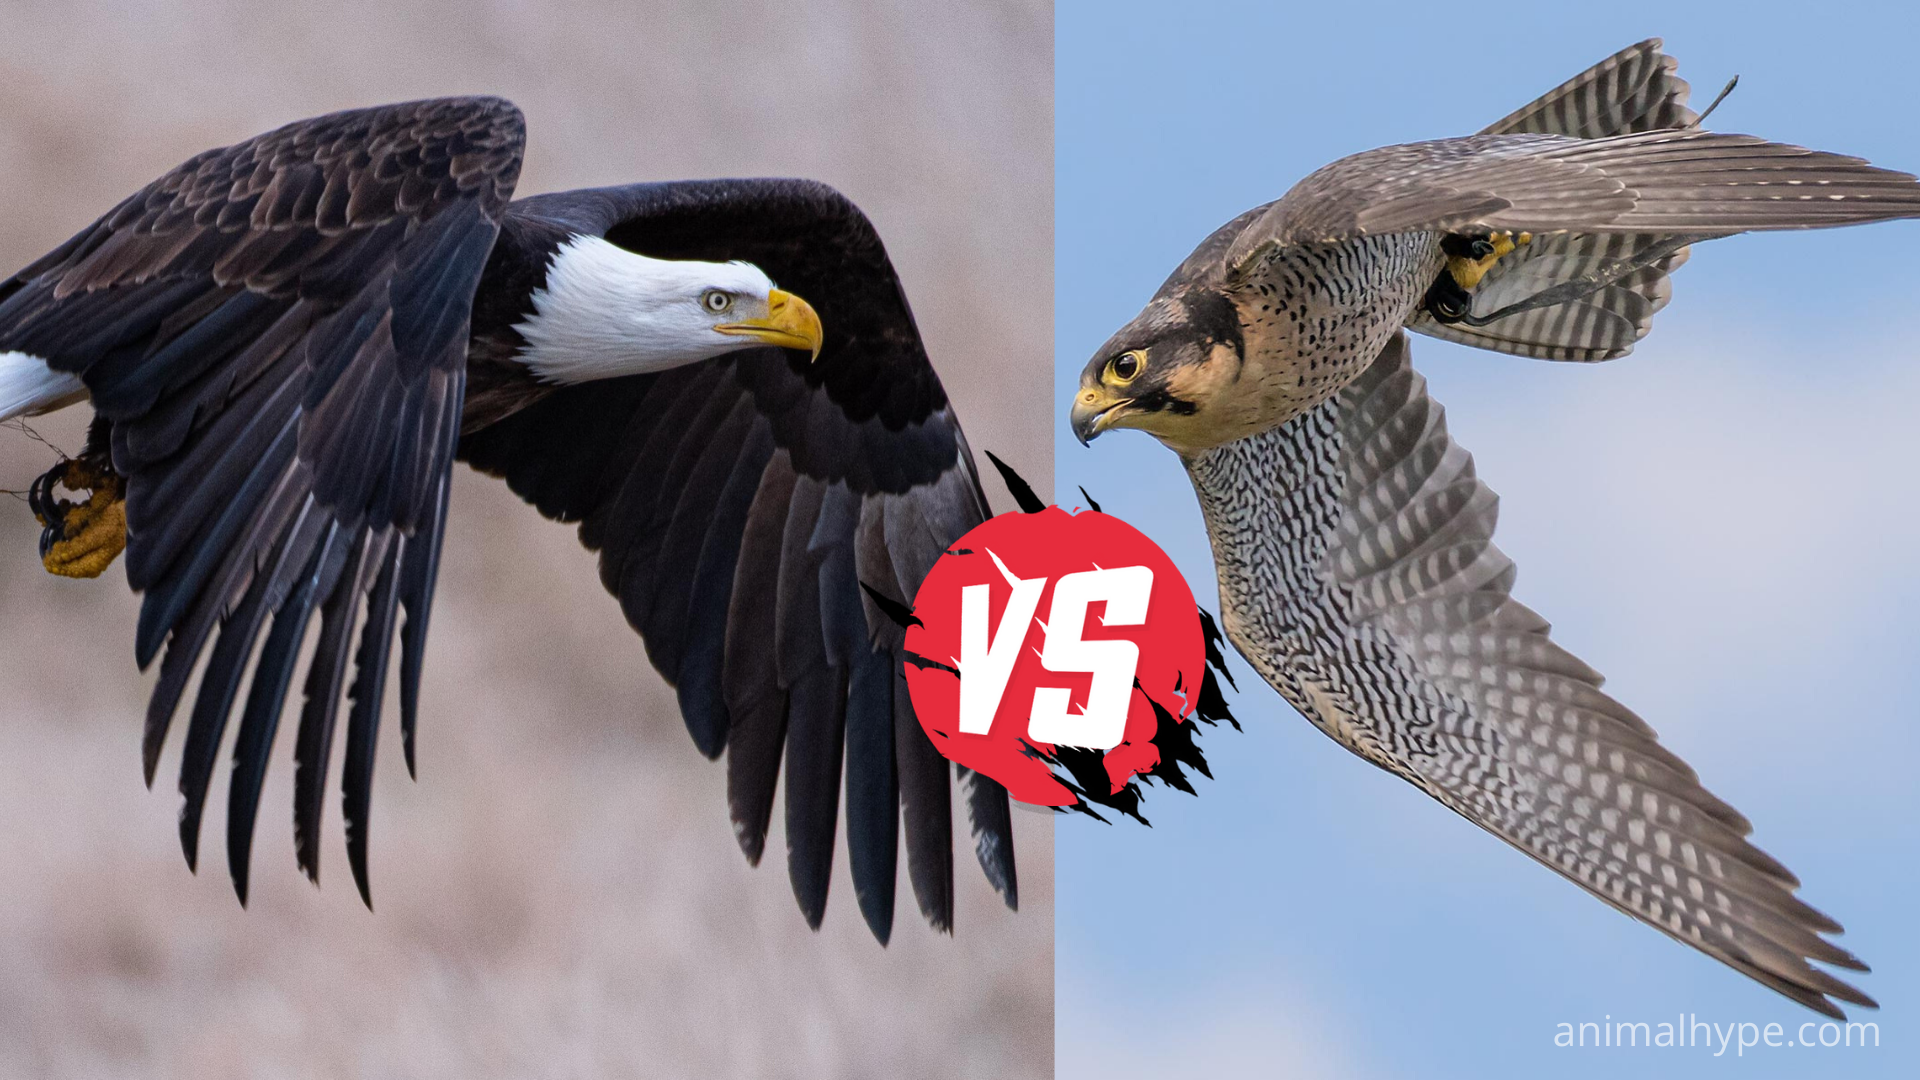 Who is faster eagle or falcon?